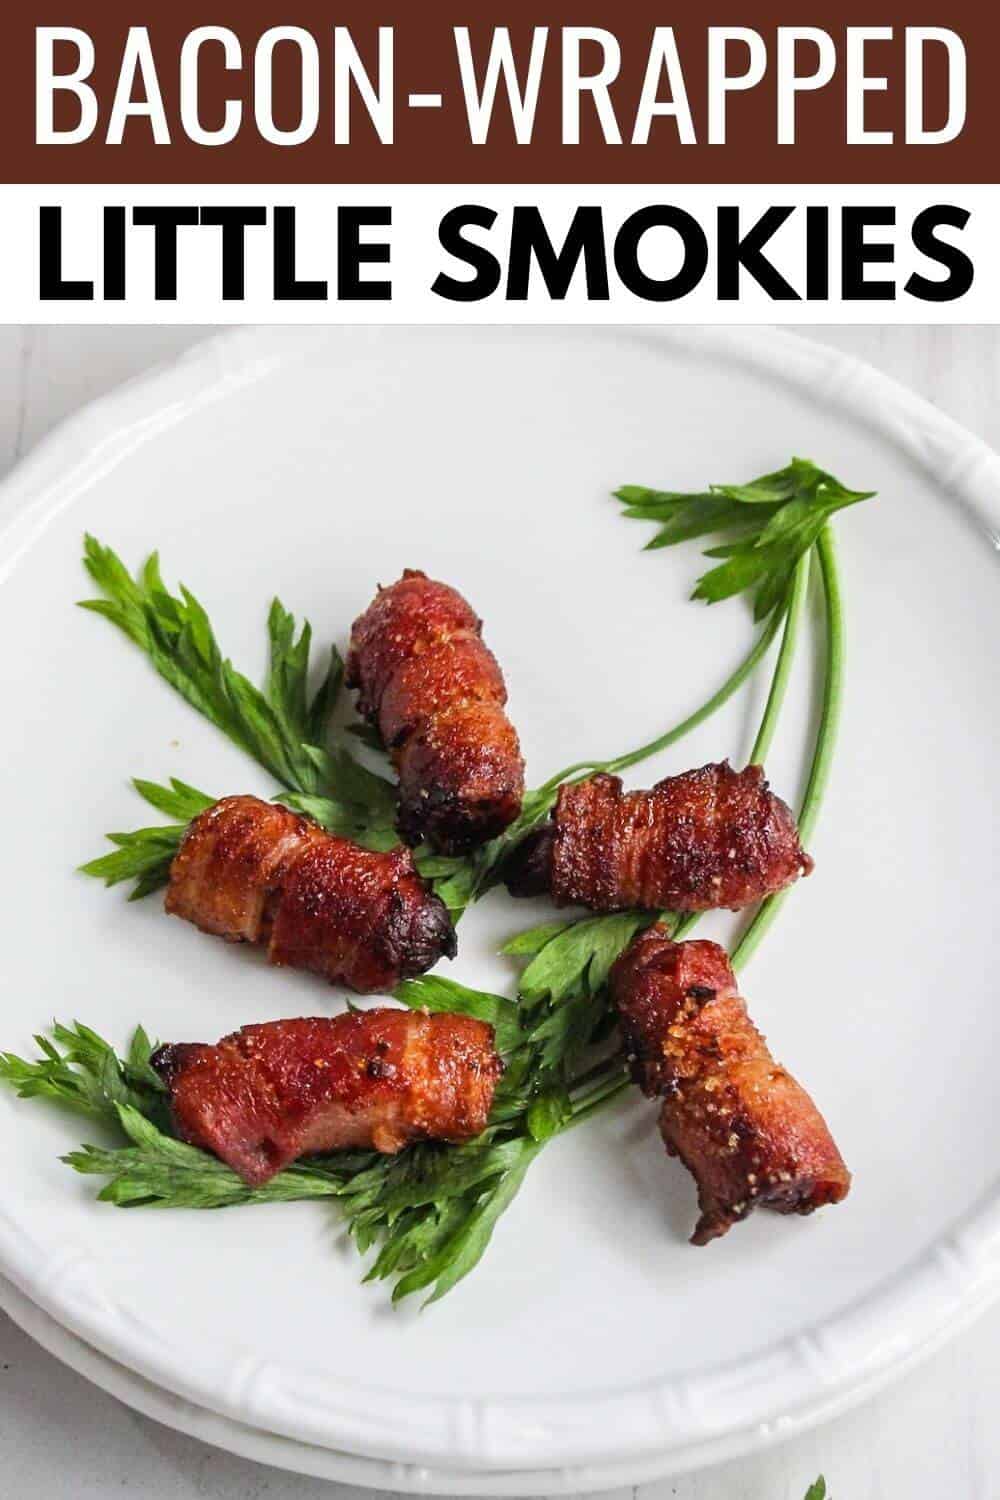 Bacon wrapped little smokies with recipe title text overlay.